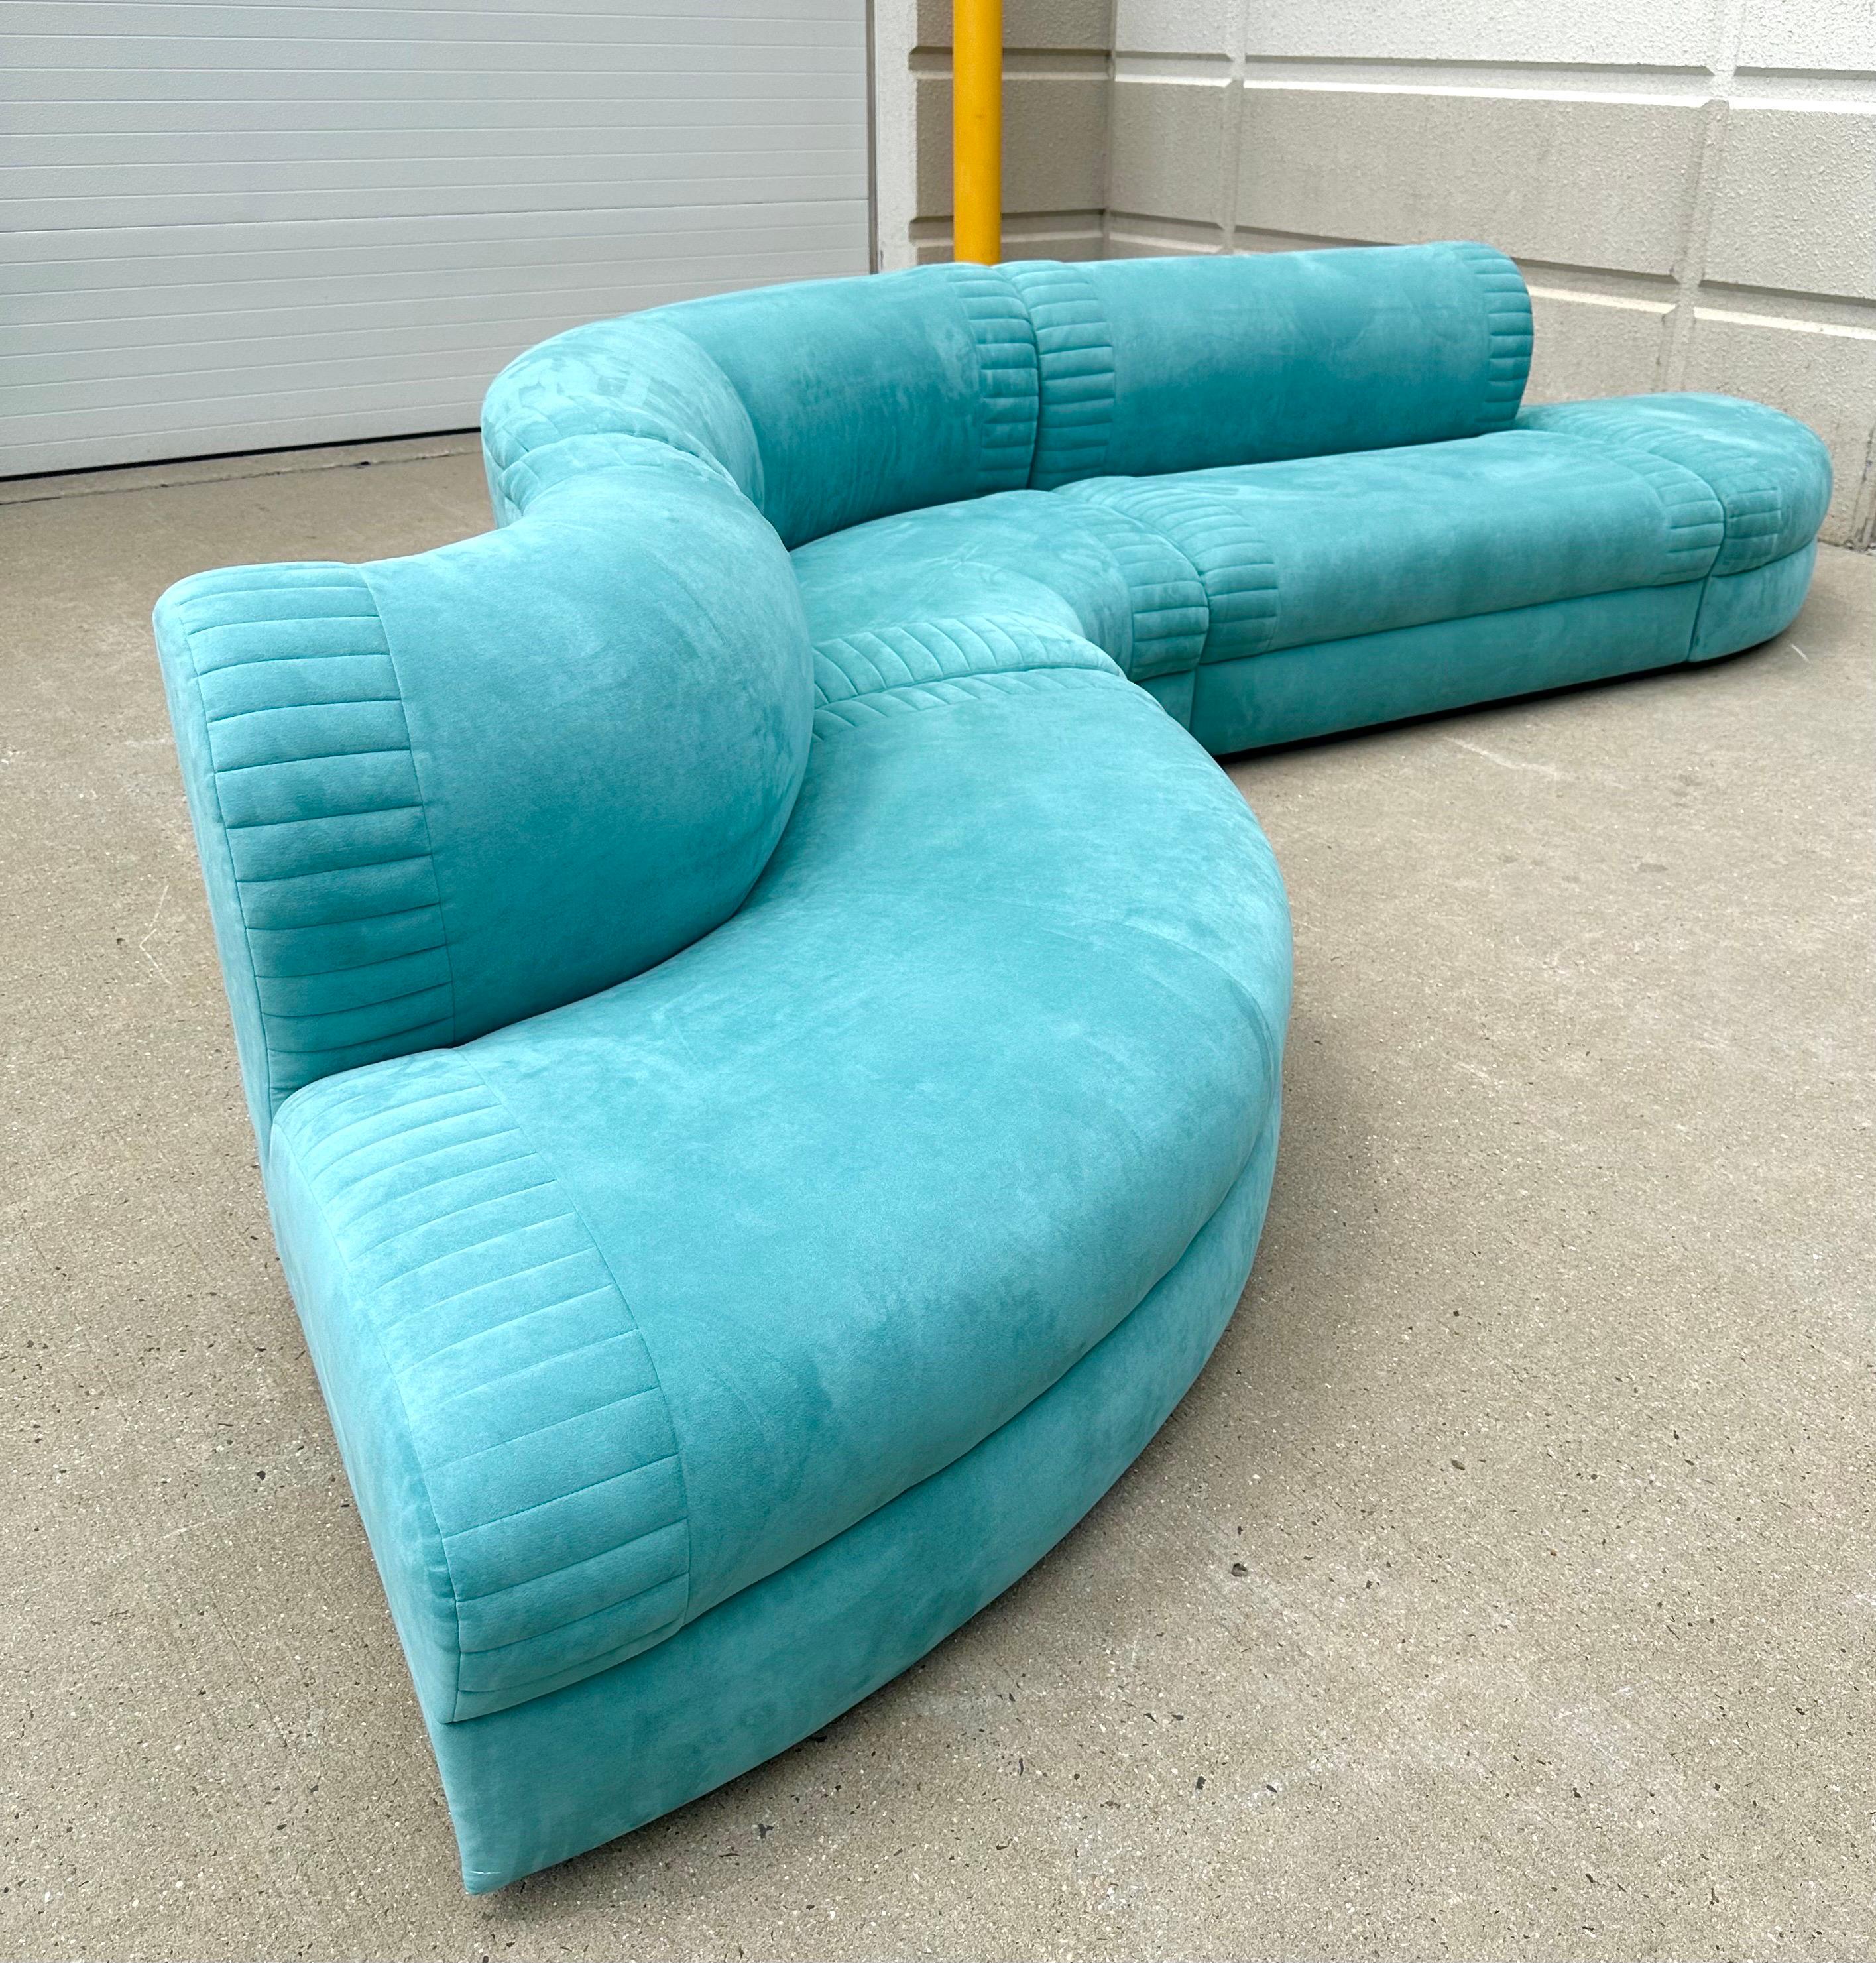 Vintage Weiman serpentine sofa attributed to Vladimir Kagan 

Fantastic teal microsuede four piece serpentine sofa that’s in excellent condition with no signs of wear.   This has just been freshly steam cleaned and is ready to be